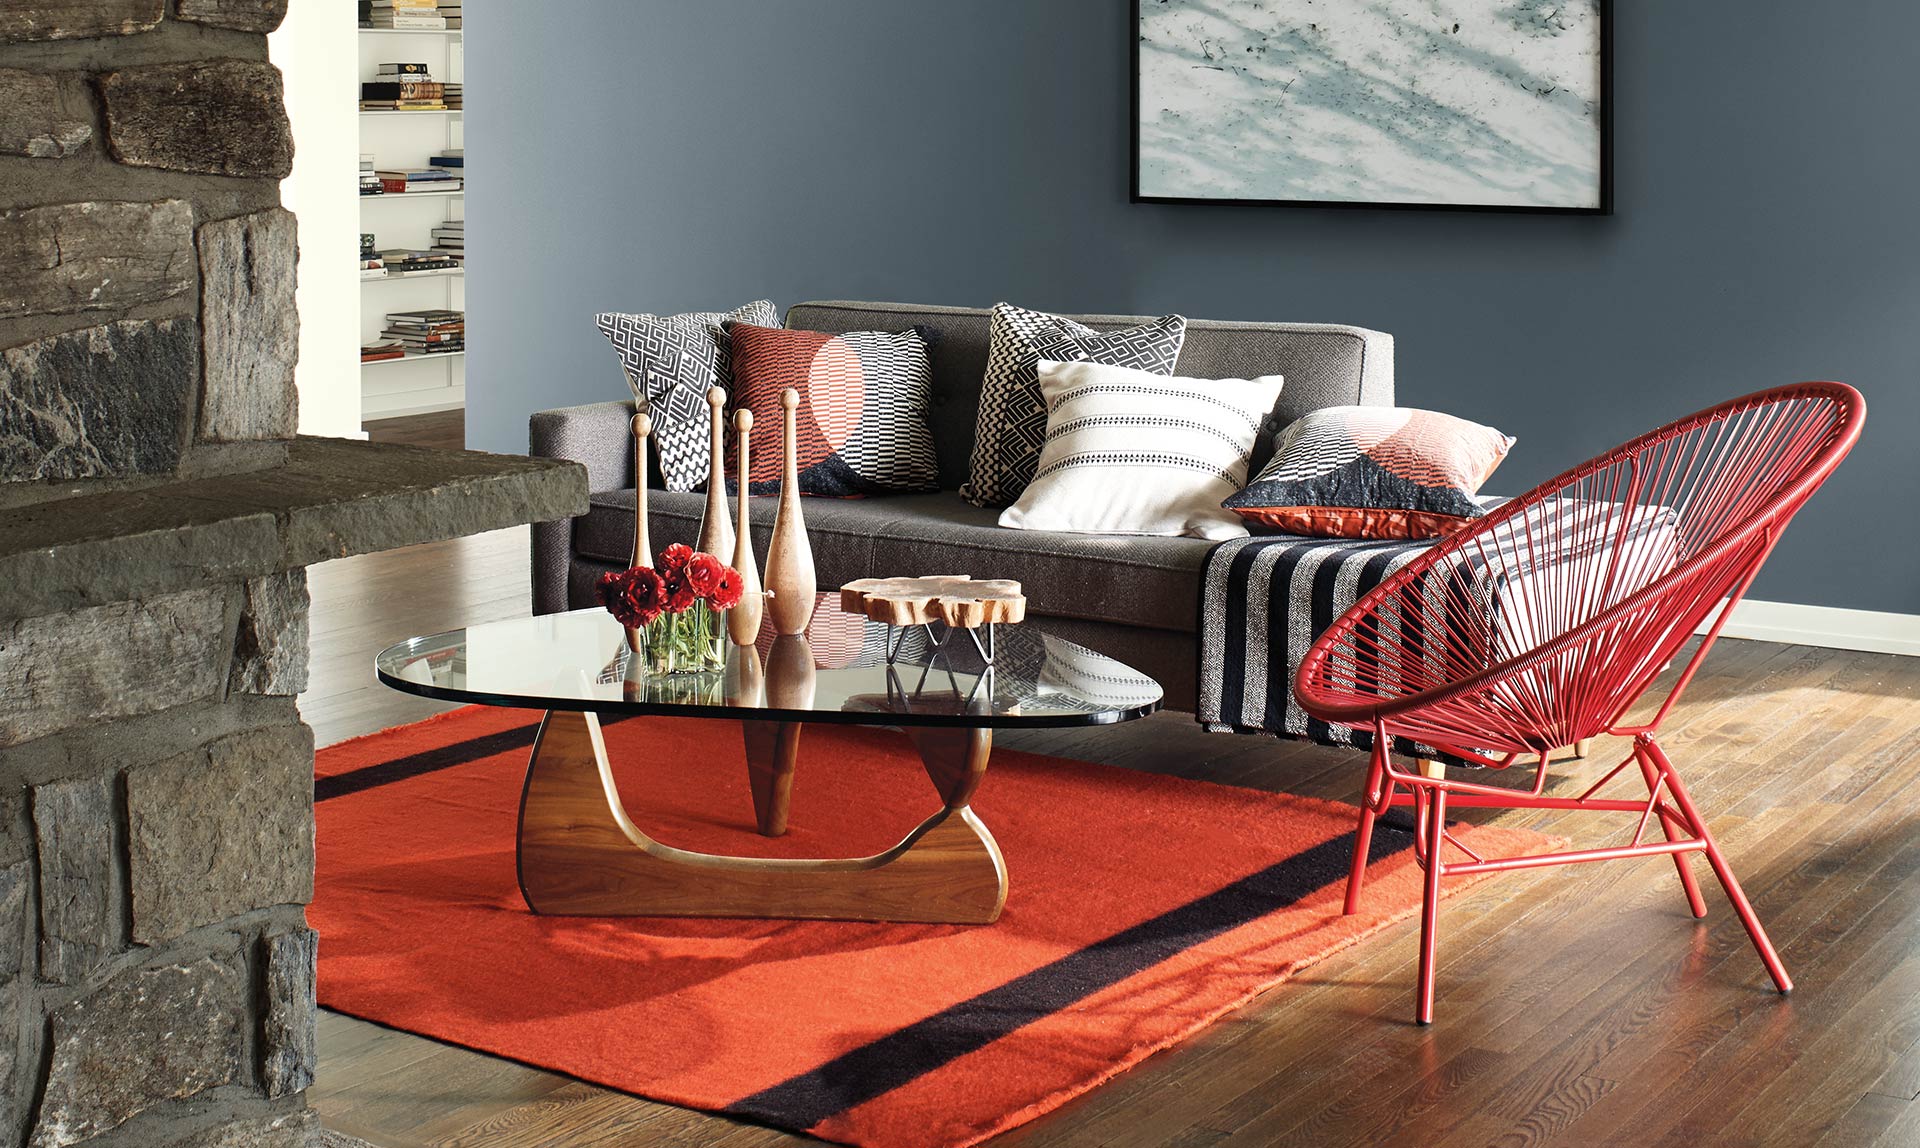 An intimate living room with gray accent wall, stone mantle, wood floors and red area rug is equal parts contemporary and cozy.